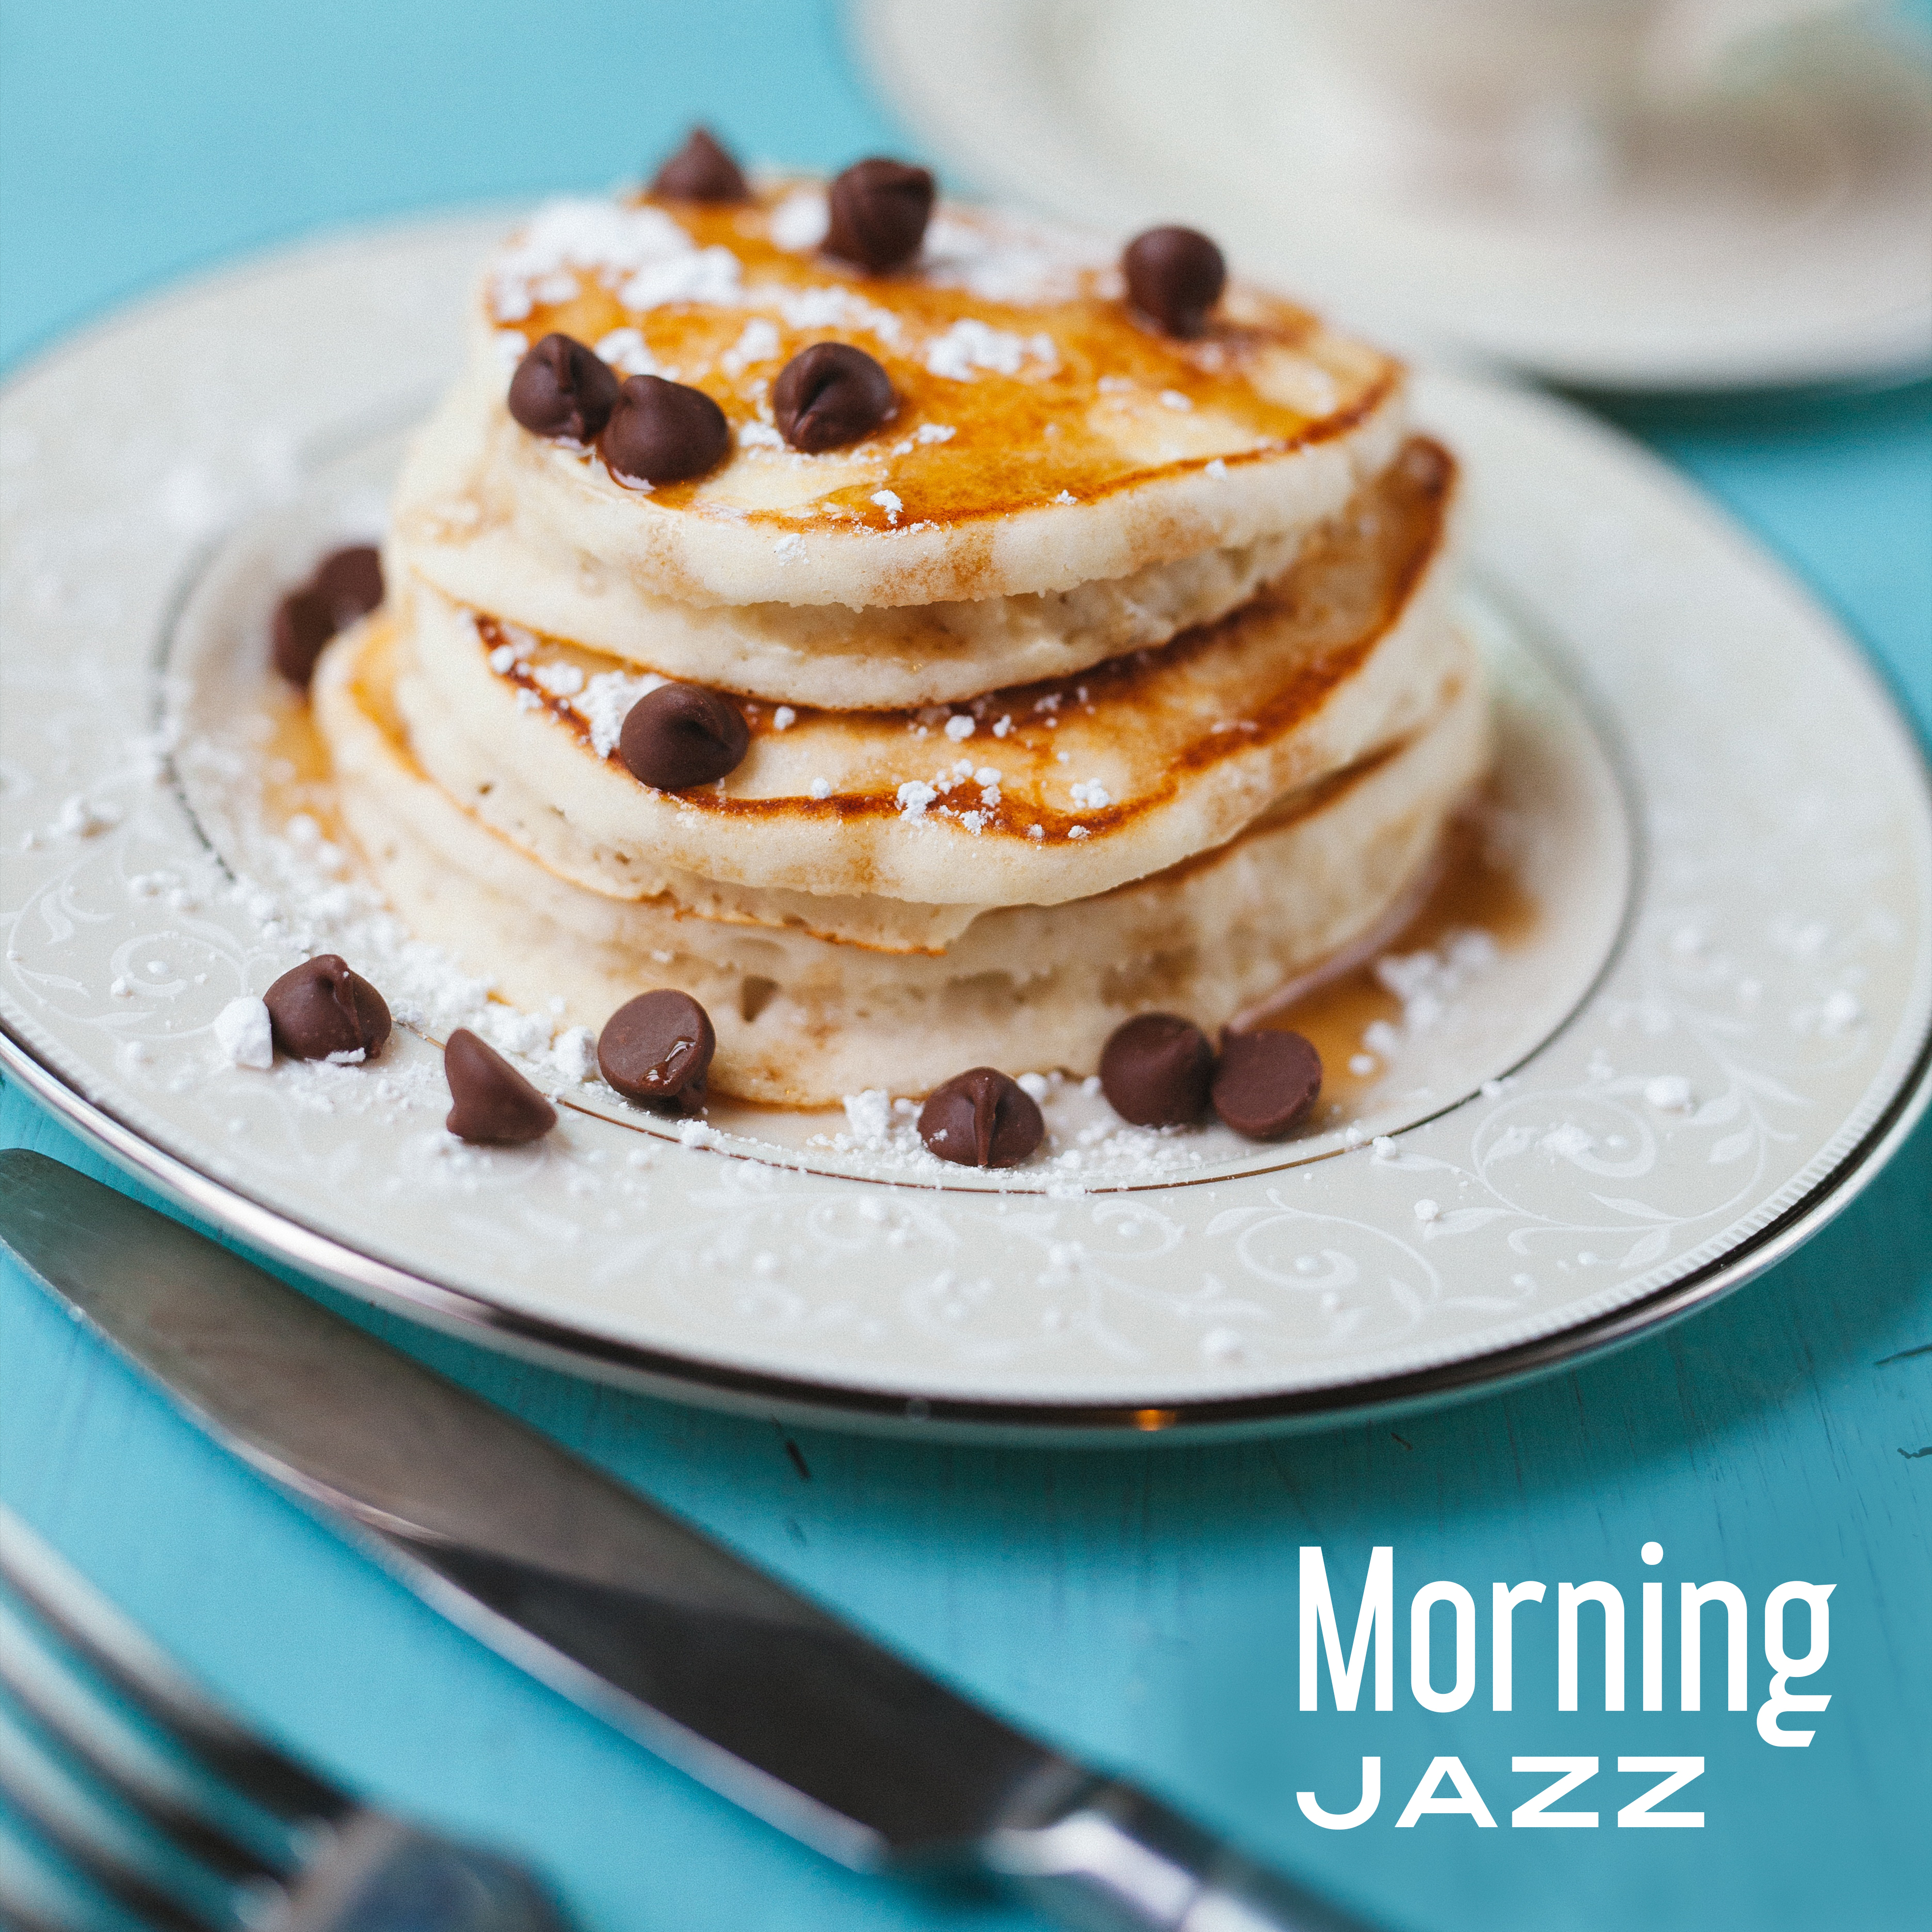 Morning Jazz  Cafe Music, Dinner Party, Meeting with Family, Piano Bar, Ambient Music, Restaurant Jazz, Romantic Time